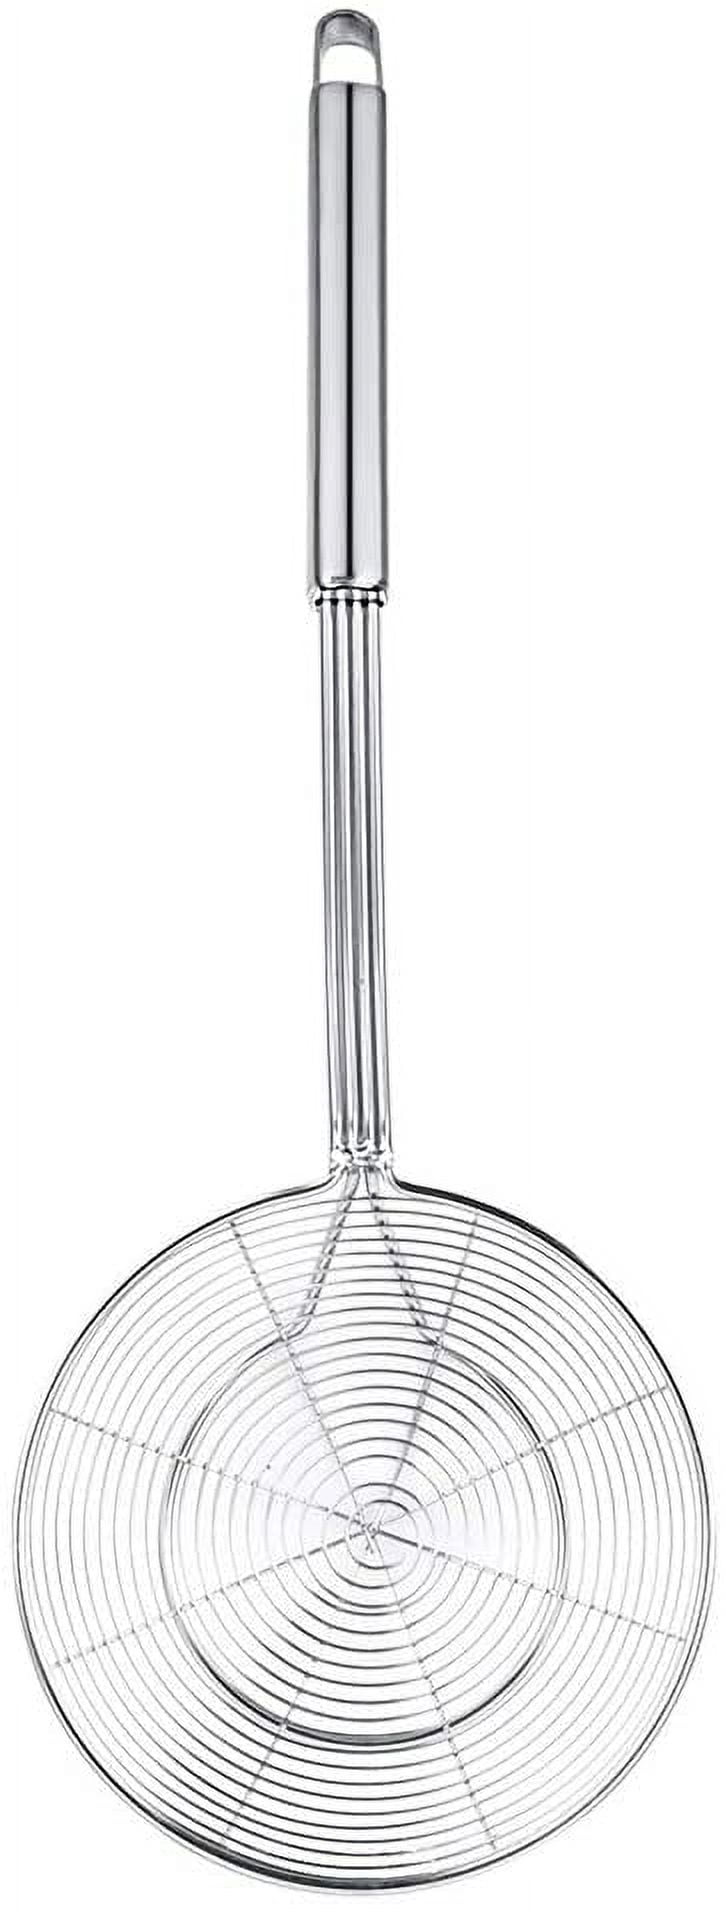 Hiware Extra Large Spider Strainer Skimmer Spoon for Frying and Cooking -  Set of 3 Stainless Steel Wire Pasta Strainer with Long Handle, Professional